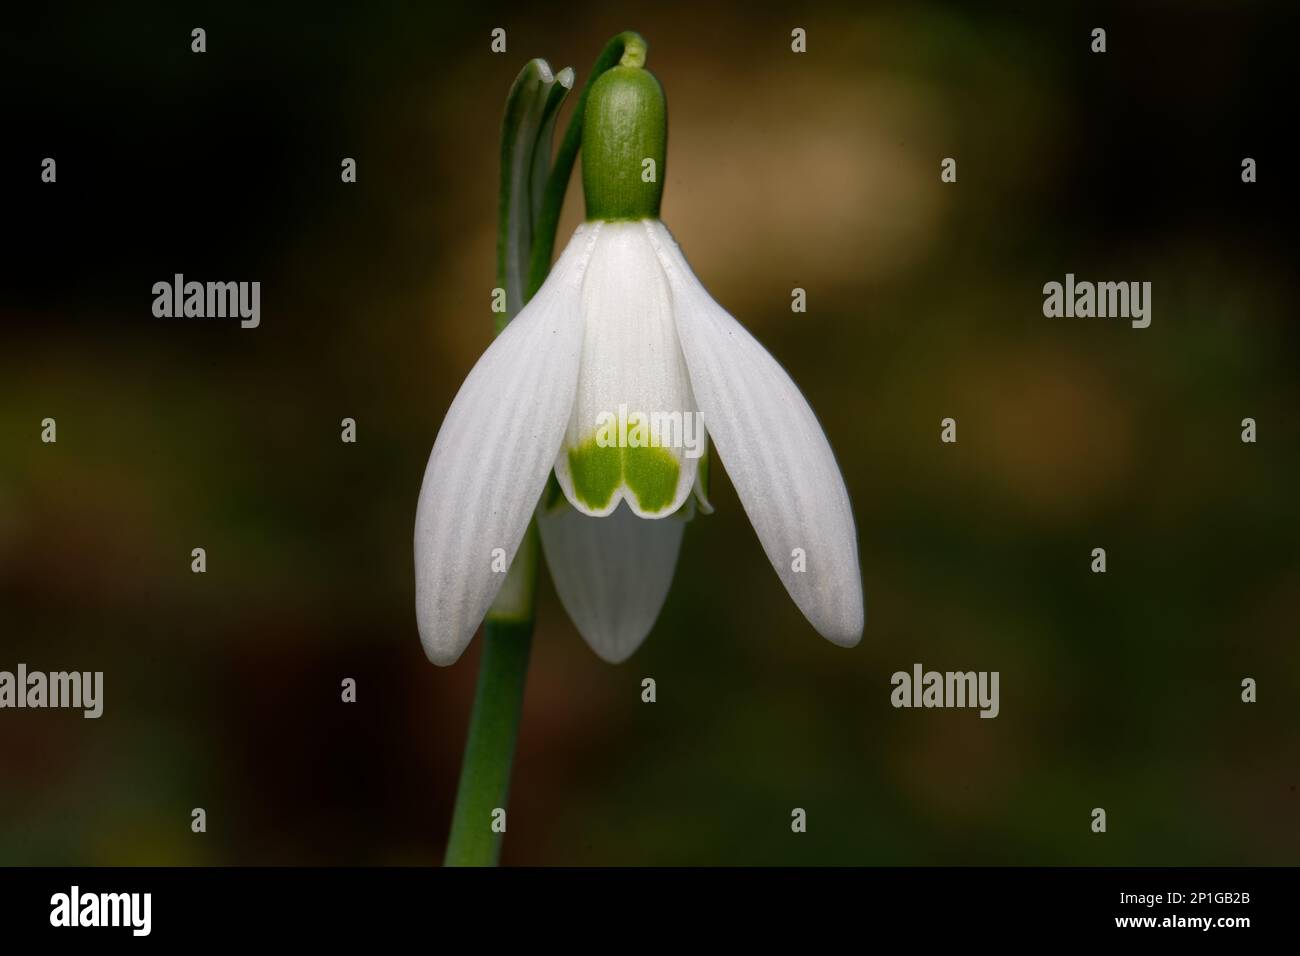 Galanthus nivalis close up of single snowdrop against blurred background Stock Photo